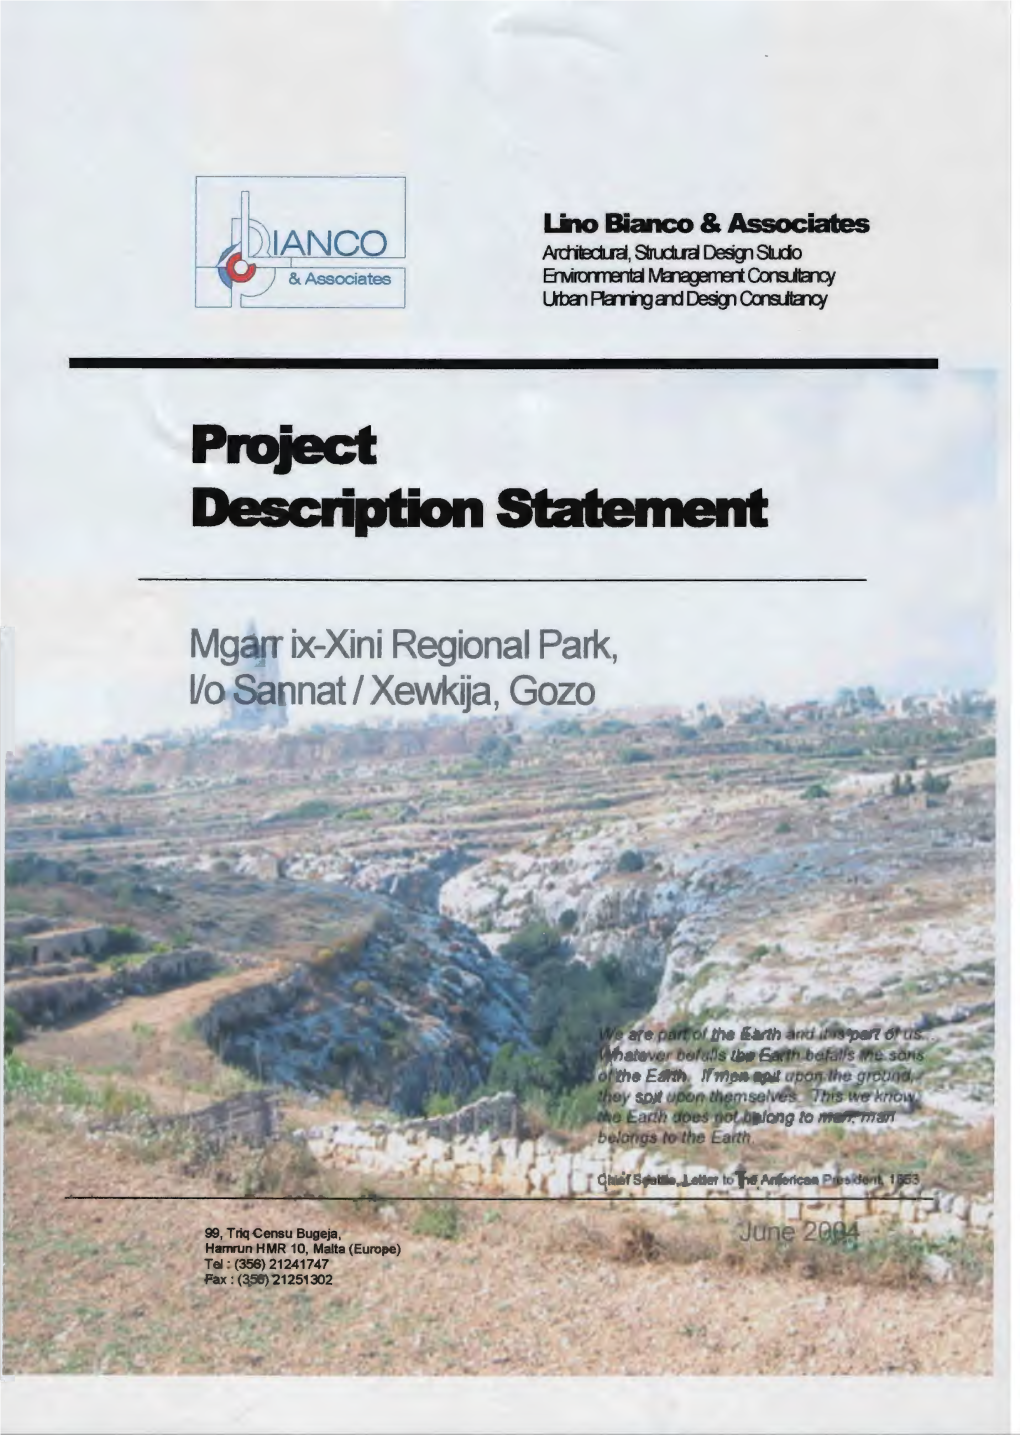 Project Description Statement for the Setting up of Mġarr Ix-Xini Regional